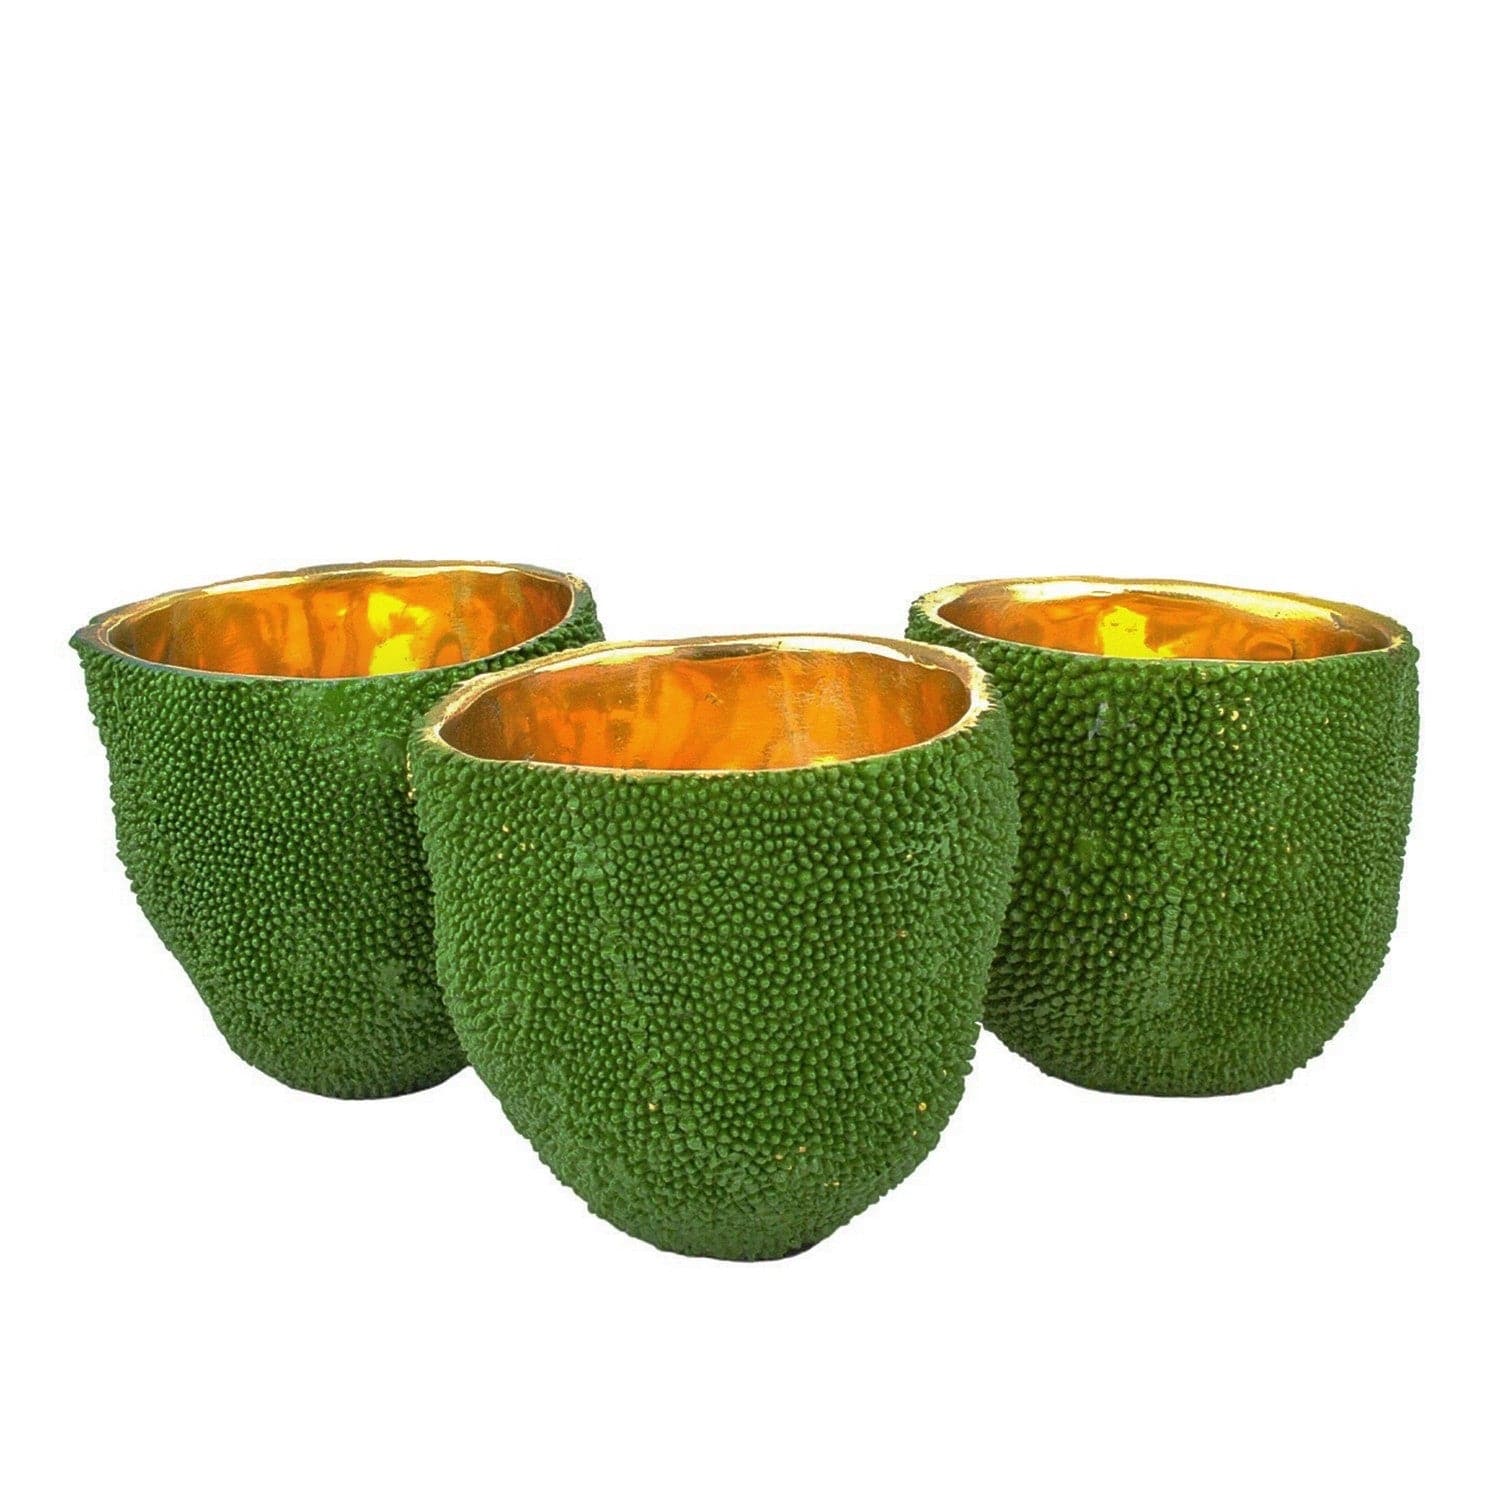 Currey and Company - 1200-0724 - Vase Set of 3 - Green/Gold